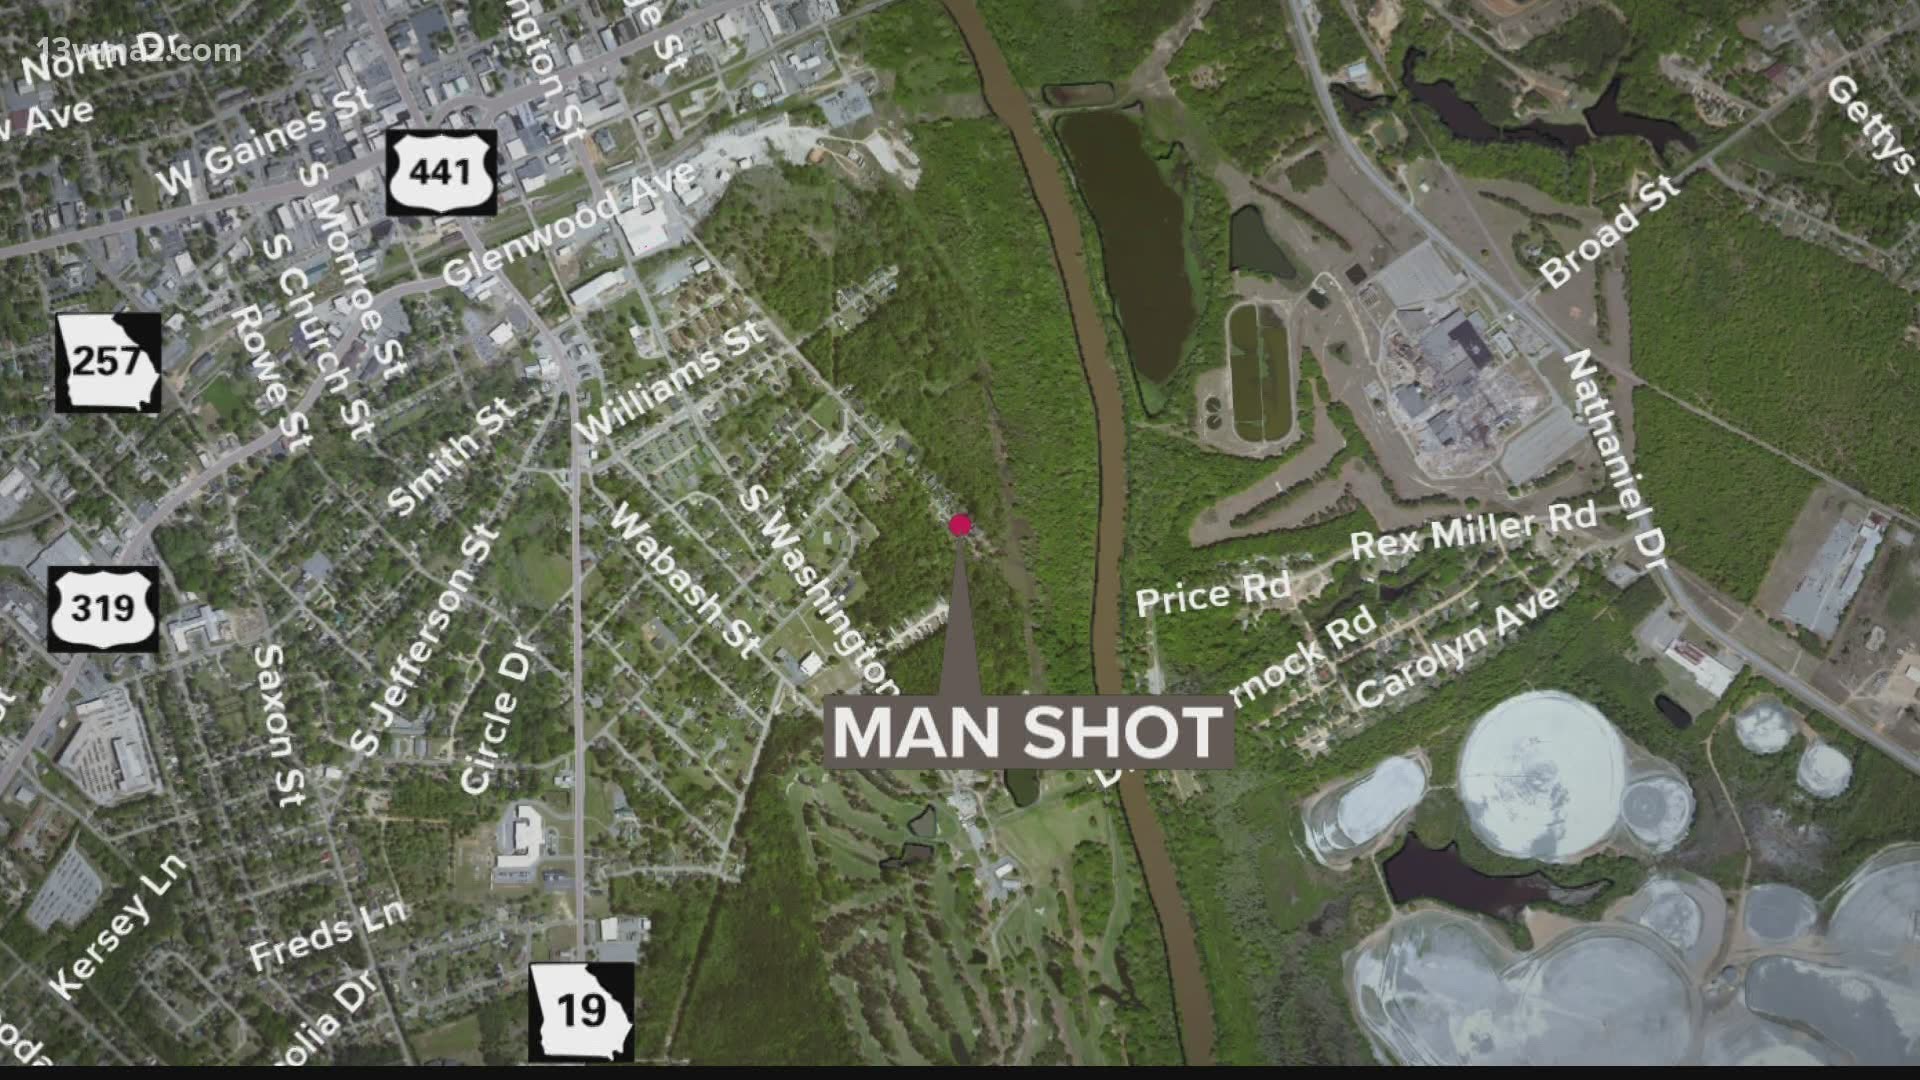 Police are investigating after a man was shot to death near downtown Dublin earlier this week.